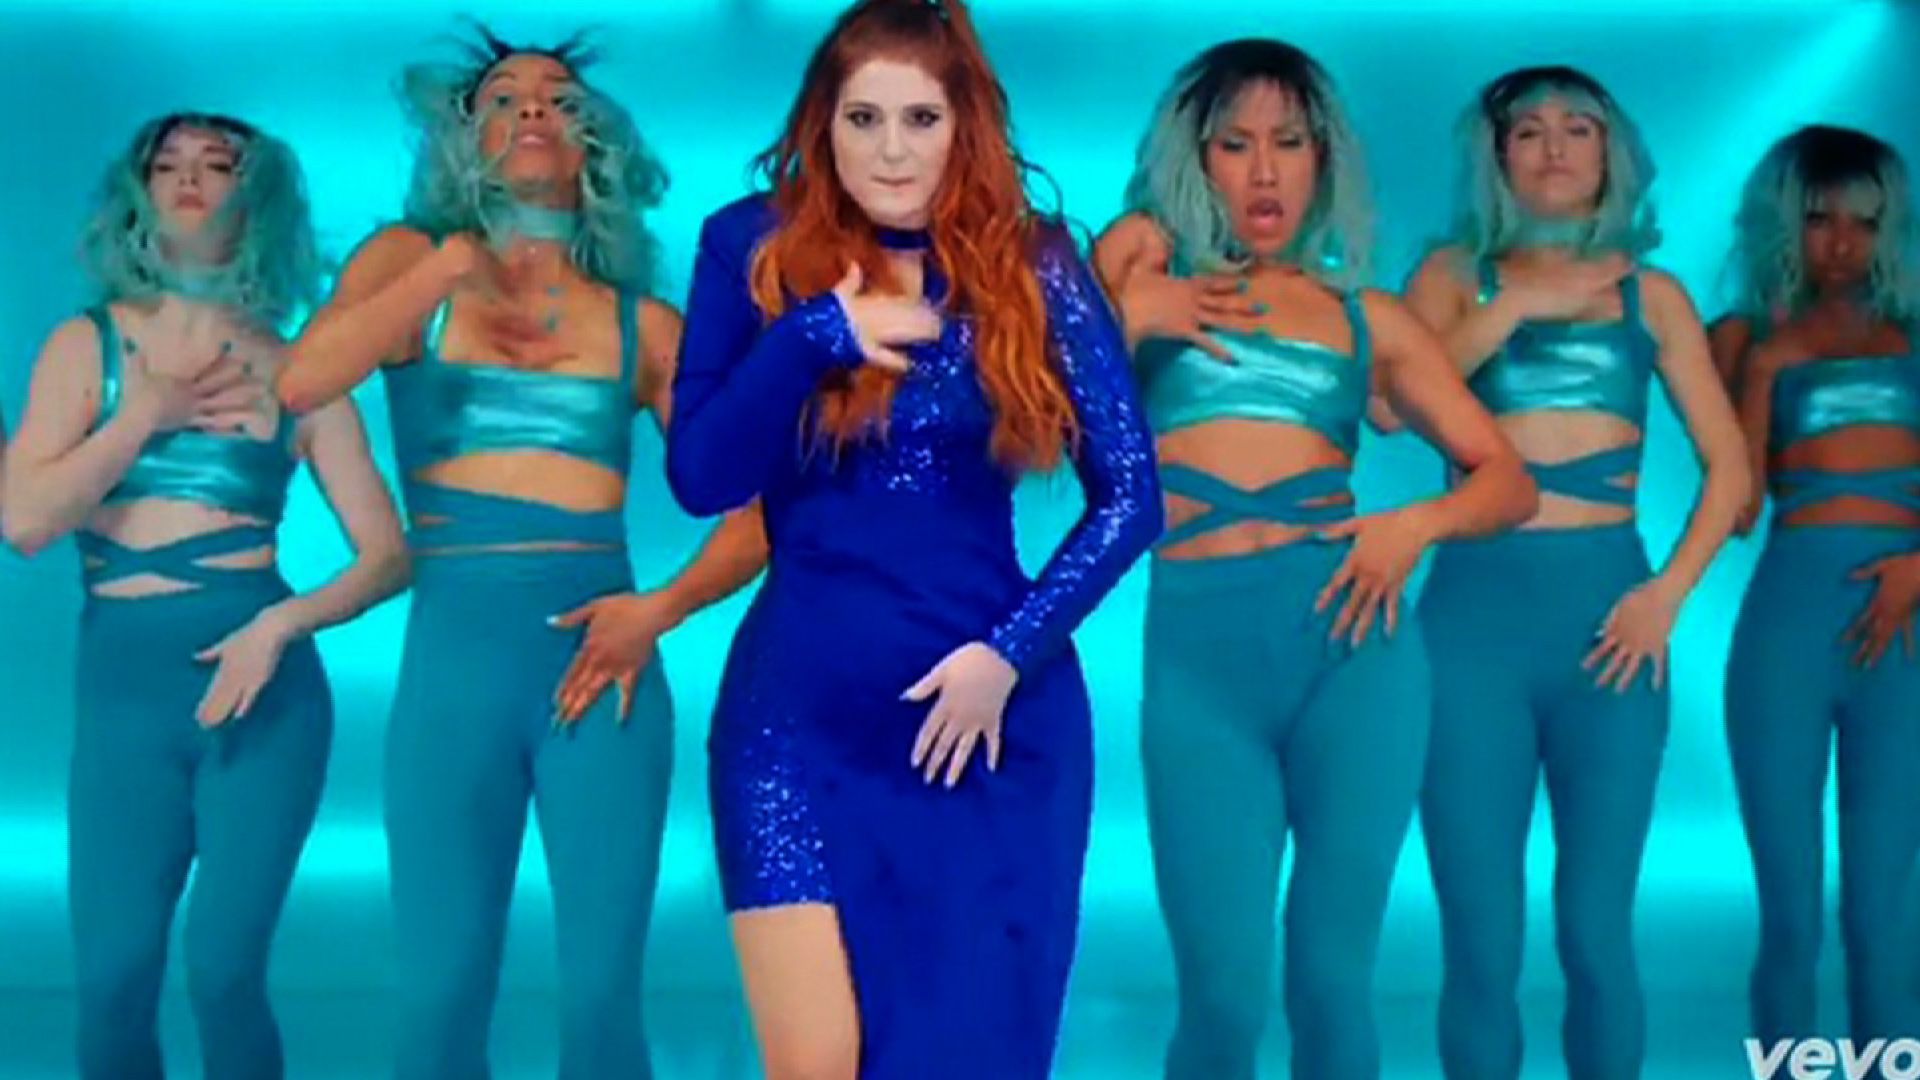 Meghan Trainor Fights Body Image With Song (WATCH) - Good News Network